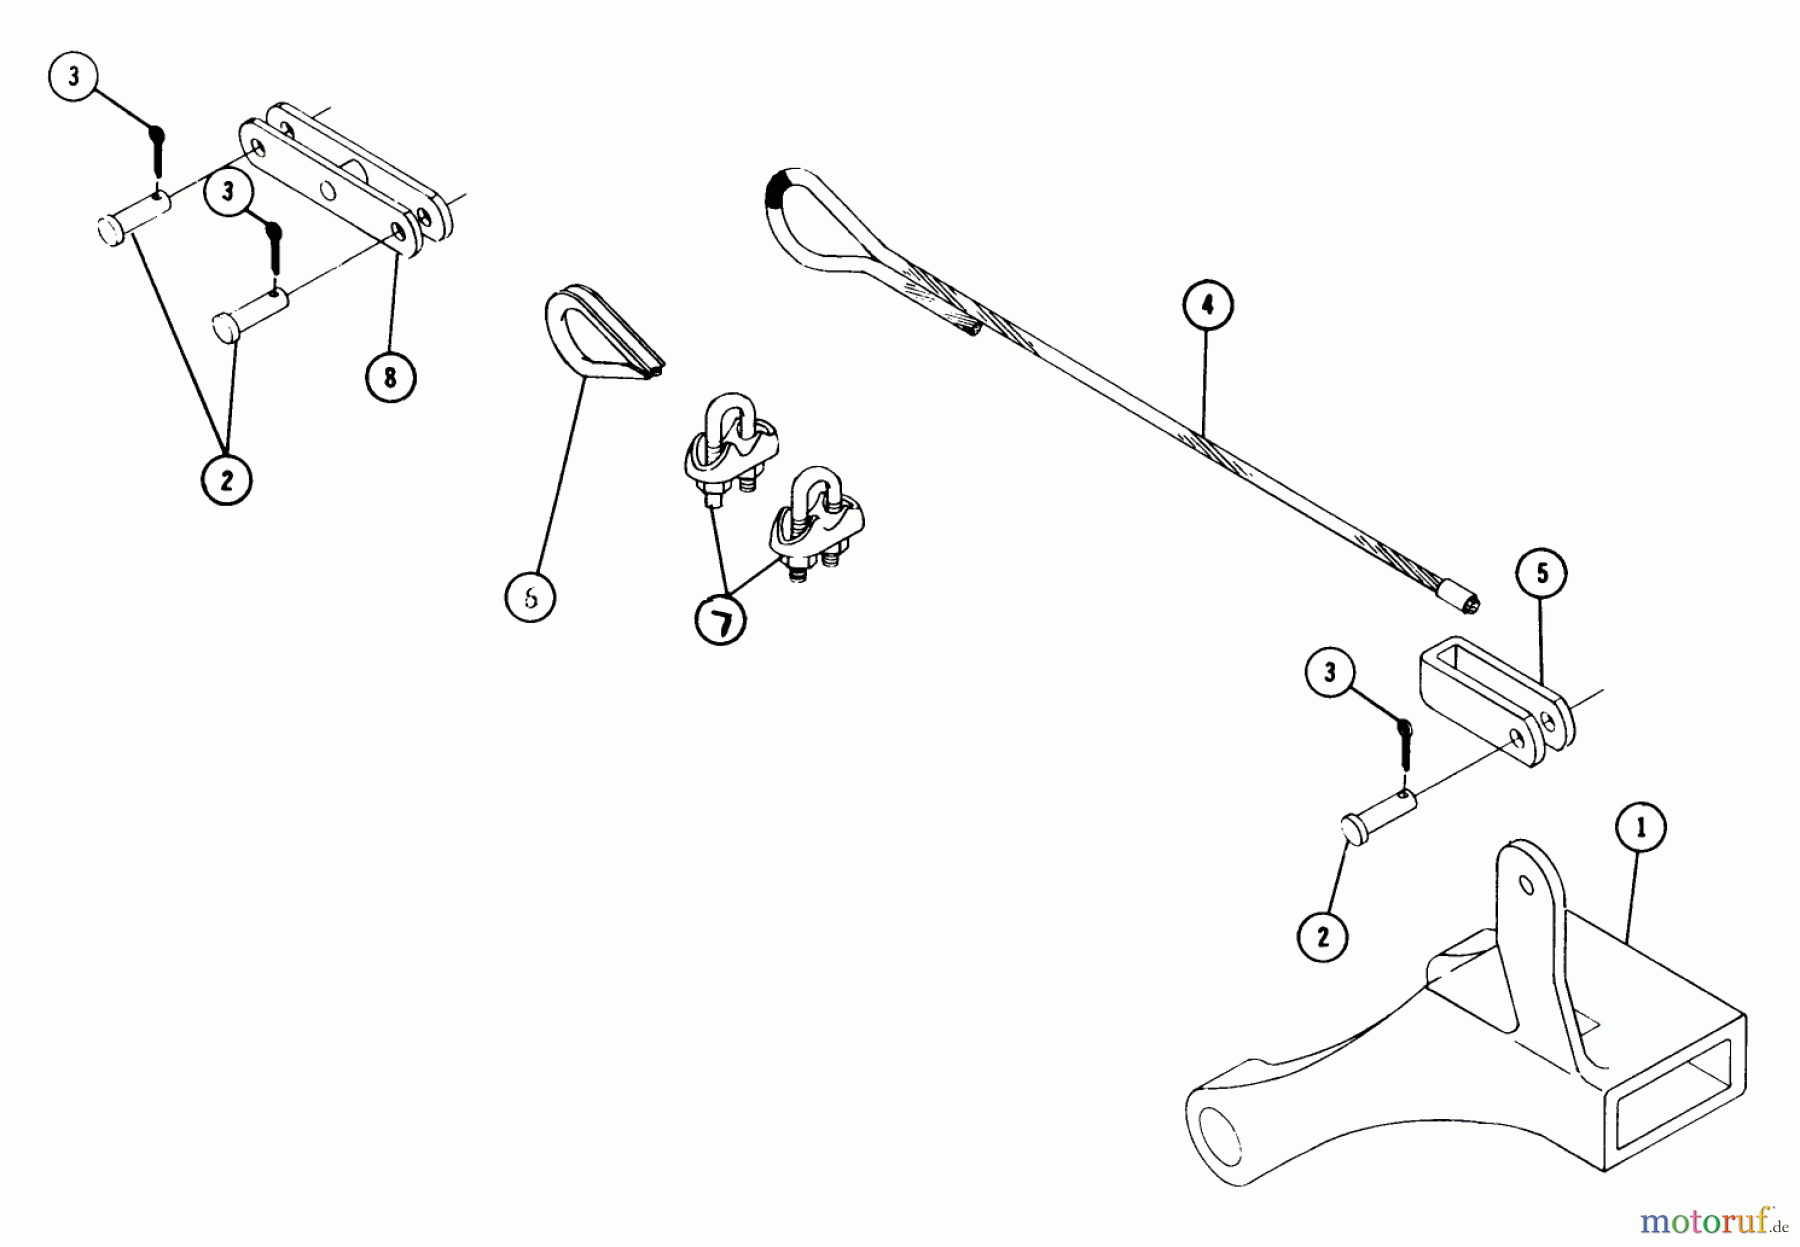  Toro Neu Accessories, Mower 85521 - Toro Slot Hitch, 1973 PARTS LIST-IMPLEMENT HITCH (SLOT TYPE) FACTORY ORDER NUMBER 8-5521